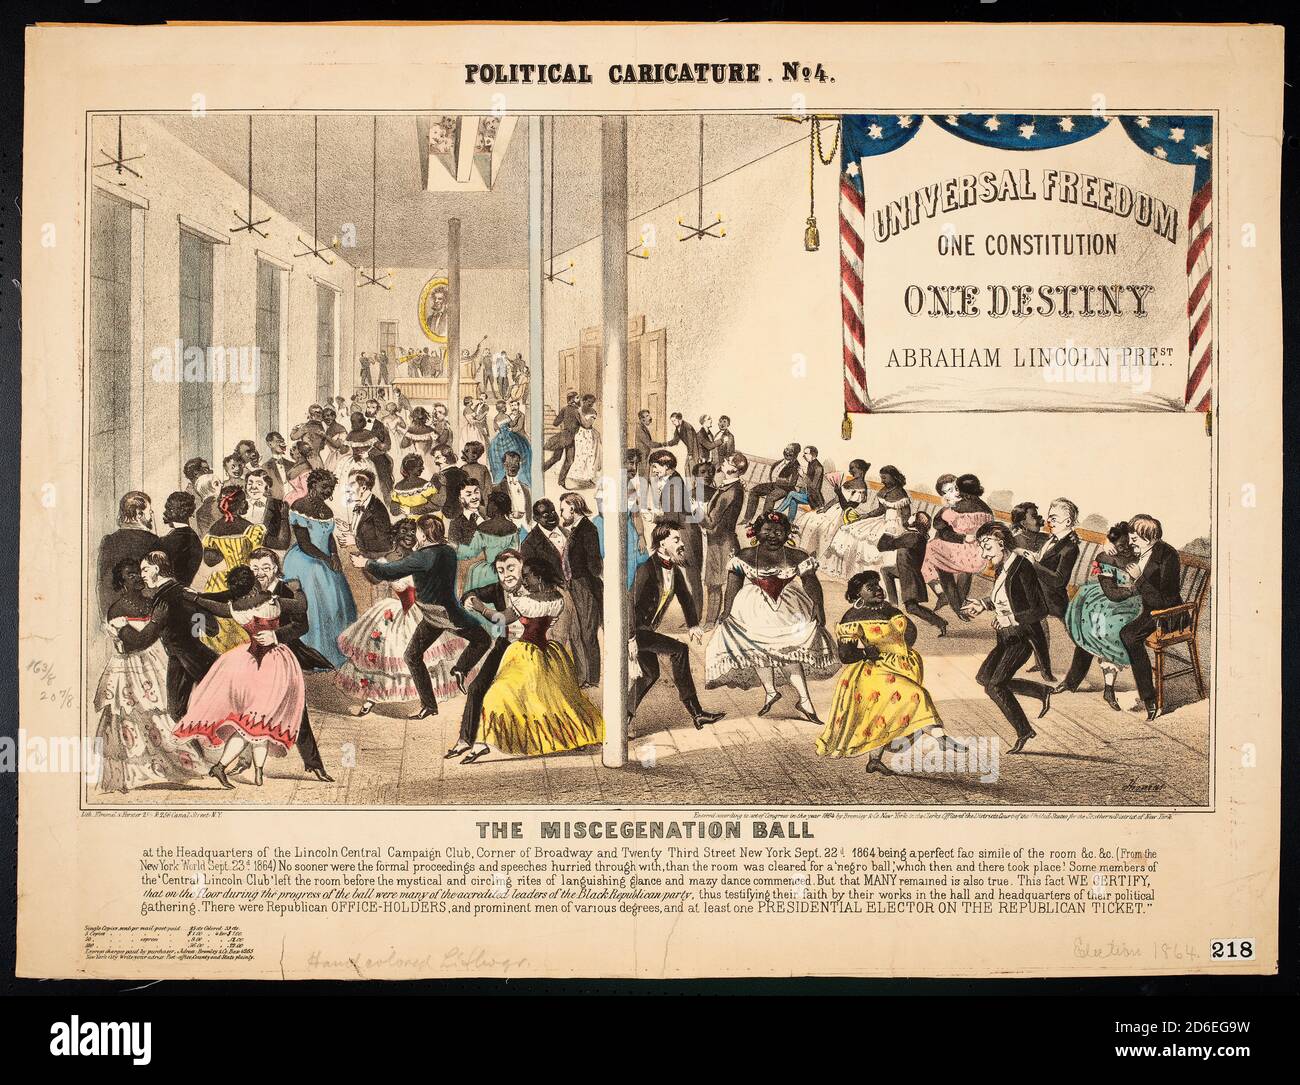 Political cartoon titled The Miscegenation Ball, 1864, by Kimmel & Forster, New York. Stock Photo